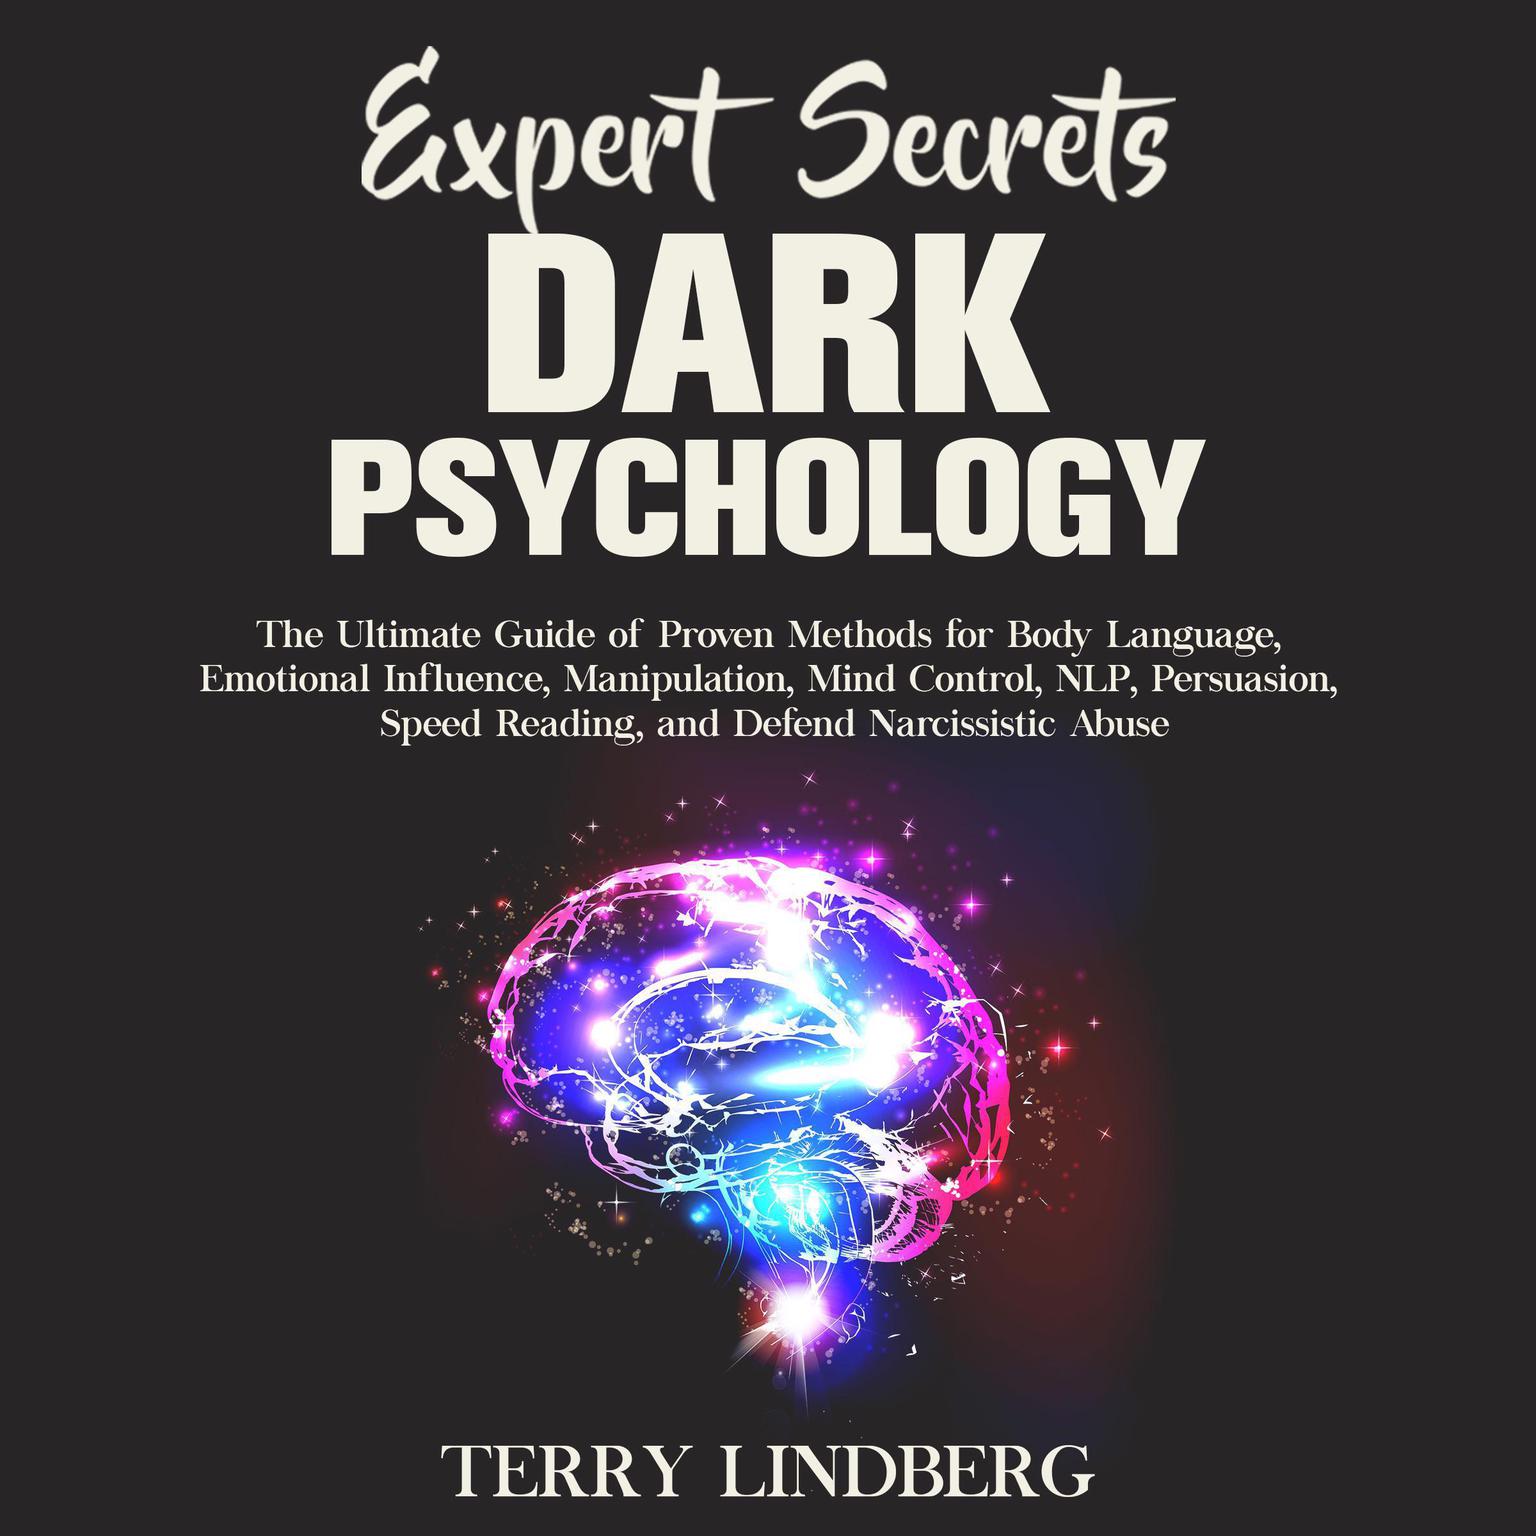 Expert Secrets – Dark Psychology: The Ultimate Guide of Proven Methods for Body Language, Emotional Influence, Manipulation, Mind Control, NLP, Persuasion, Speed Reading, and Defend Narcissistic Abuse.: The Ultimate Guide of Proven Methods for Body Language, Emotional Influence, Manipulation, Mind Control, NLP, Persuasion, Speed Reading, and Defend Narcissistic Abuse Audiobook, by Terry Lindberg